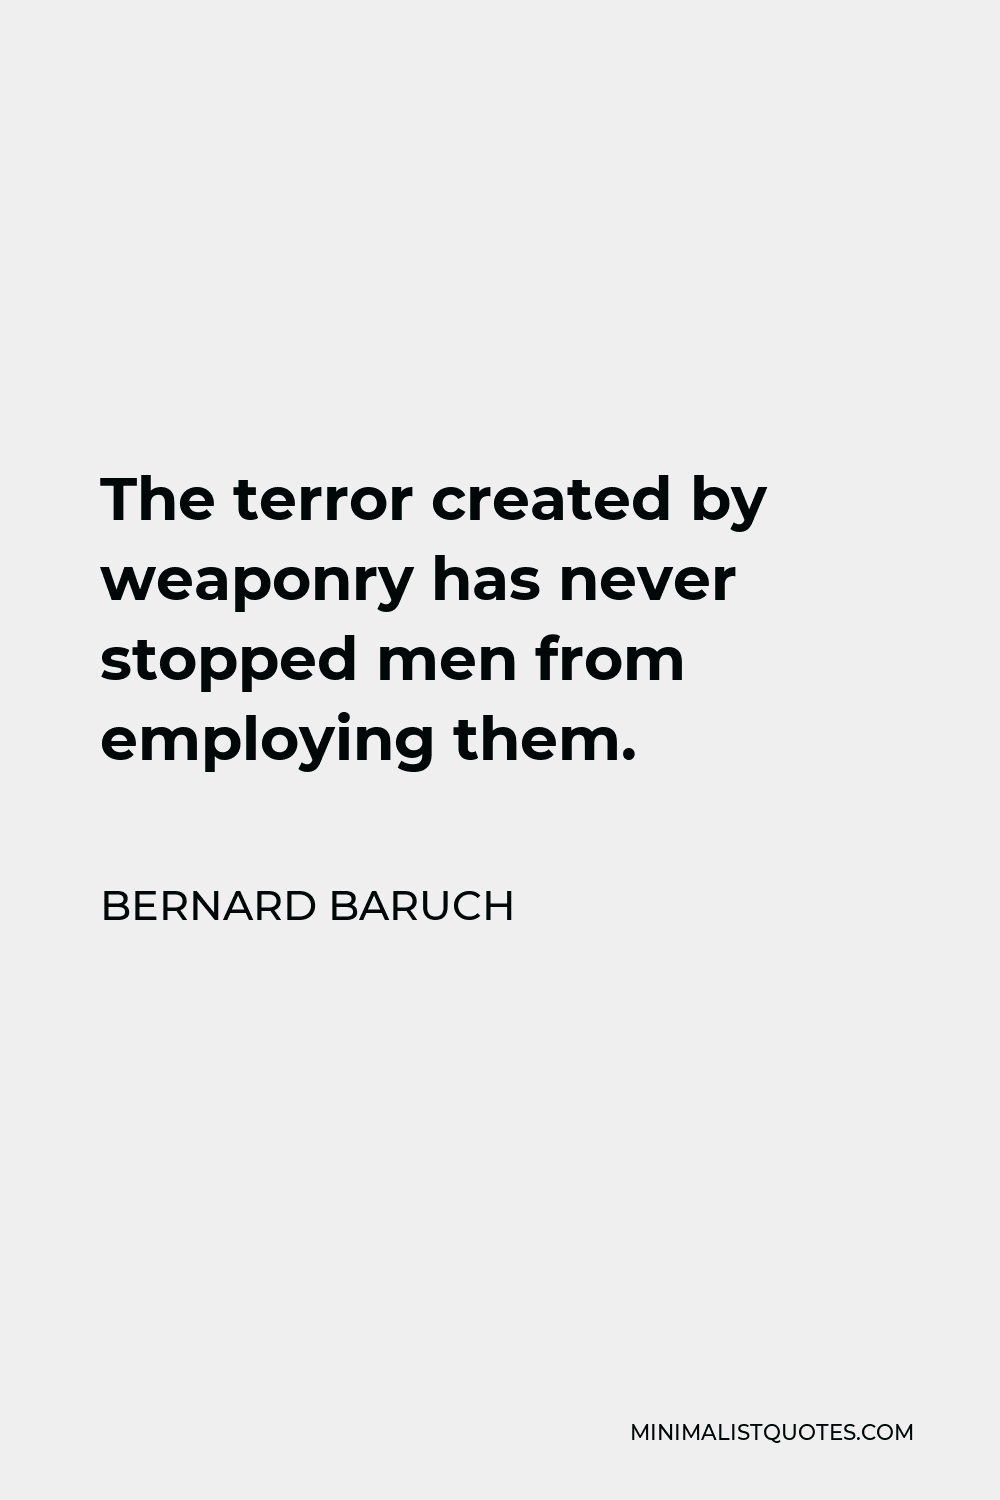 Bernard Baruch Quote - The terror created by weaponry has never stopped men from employing them.